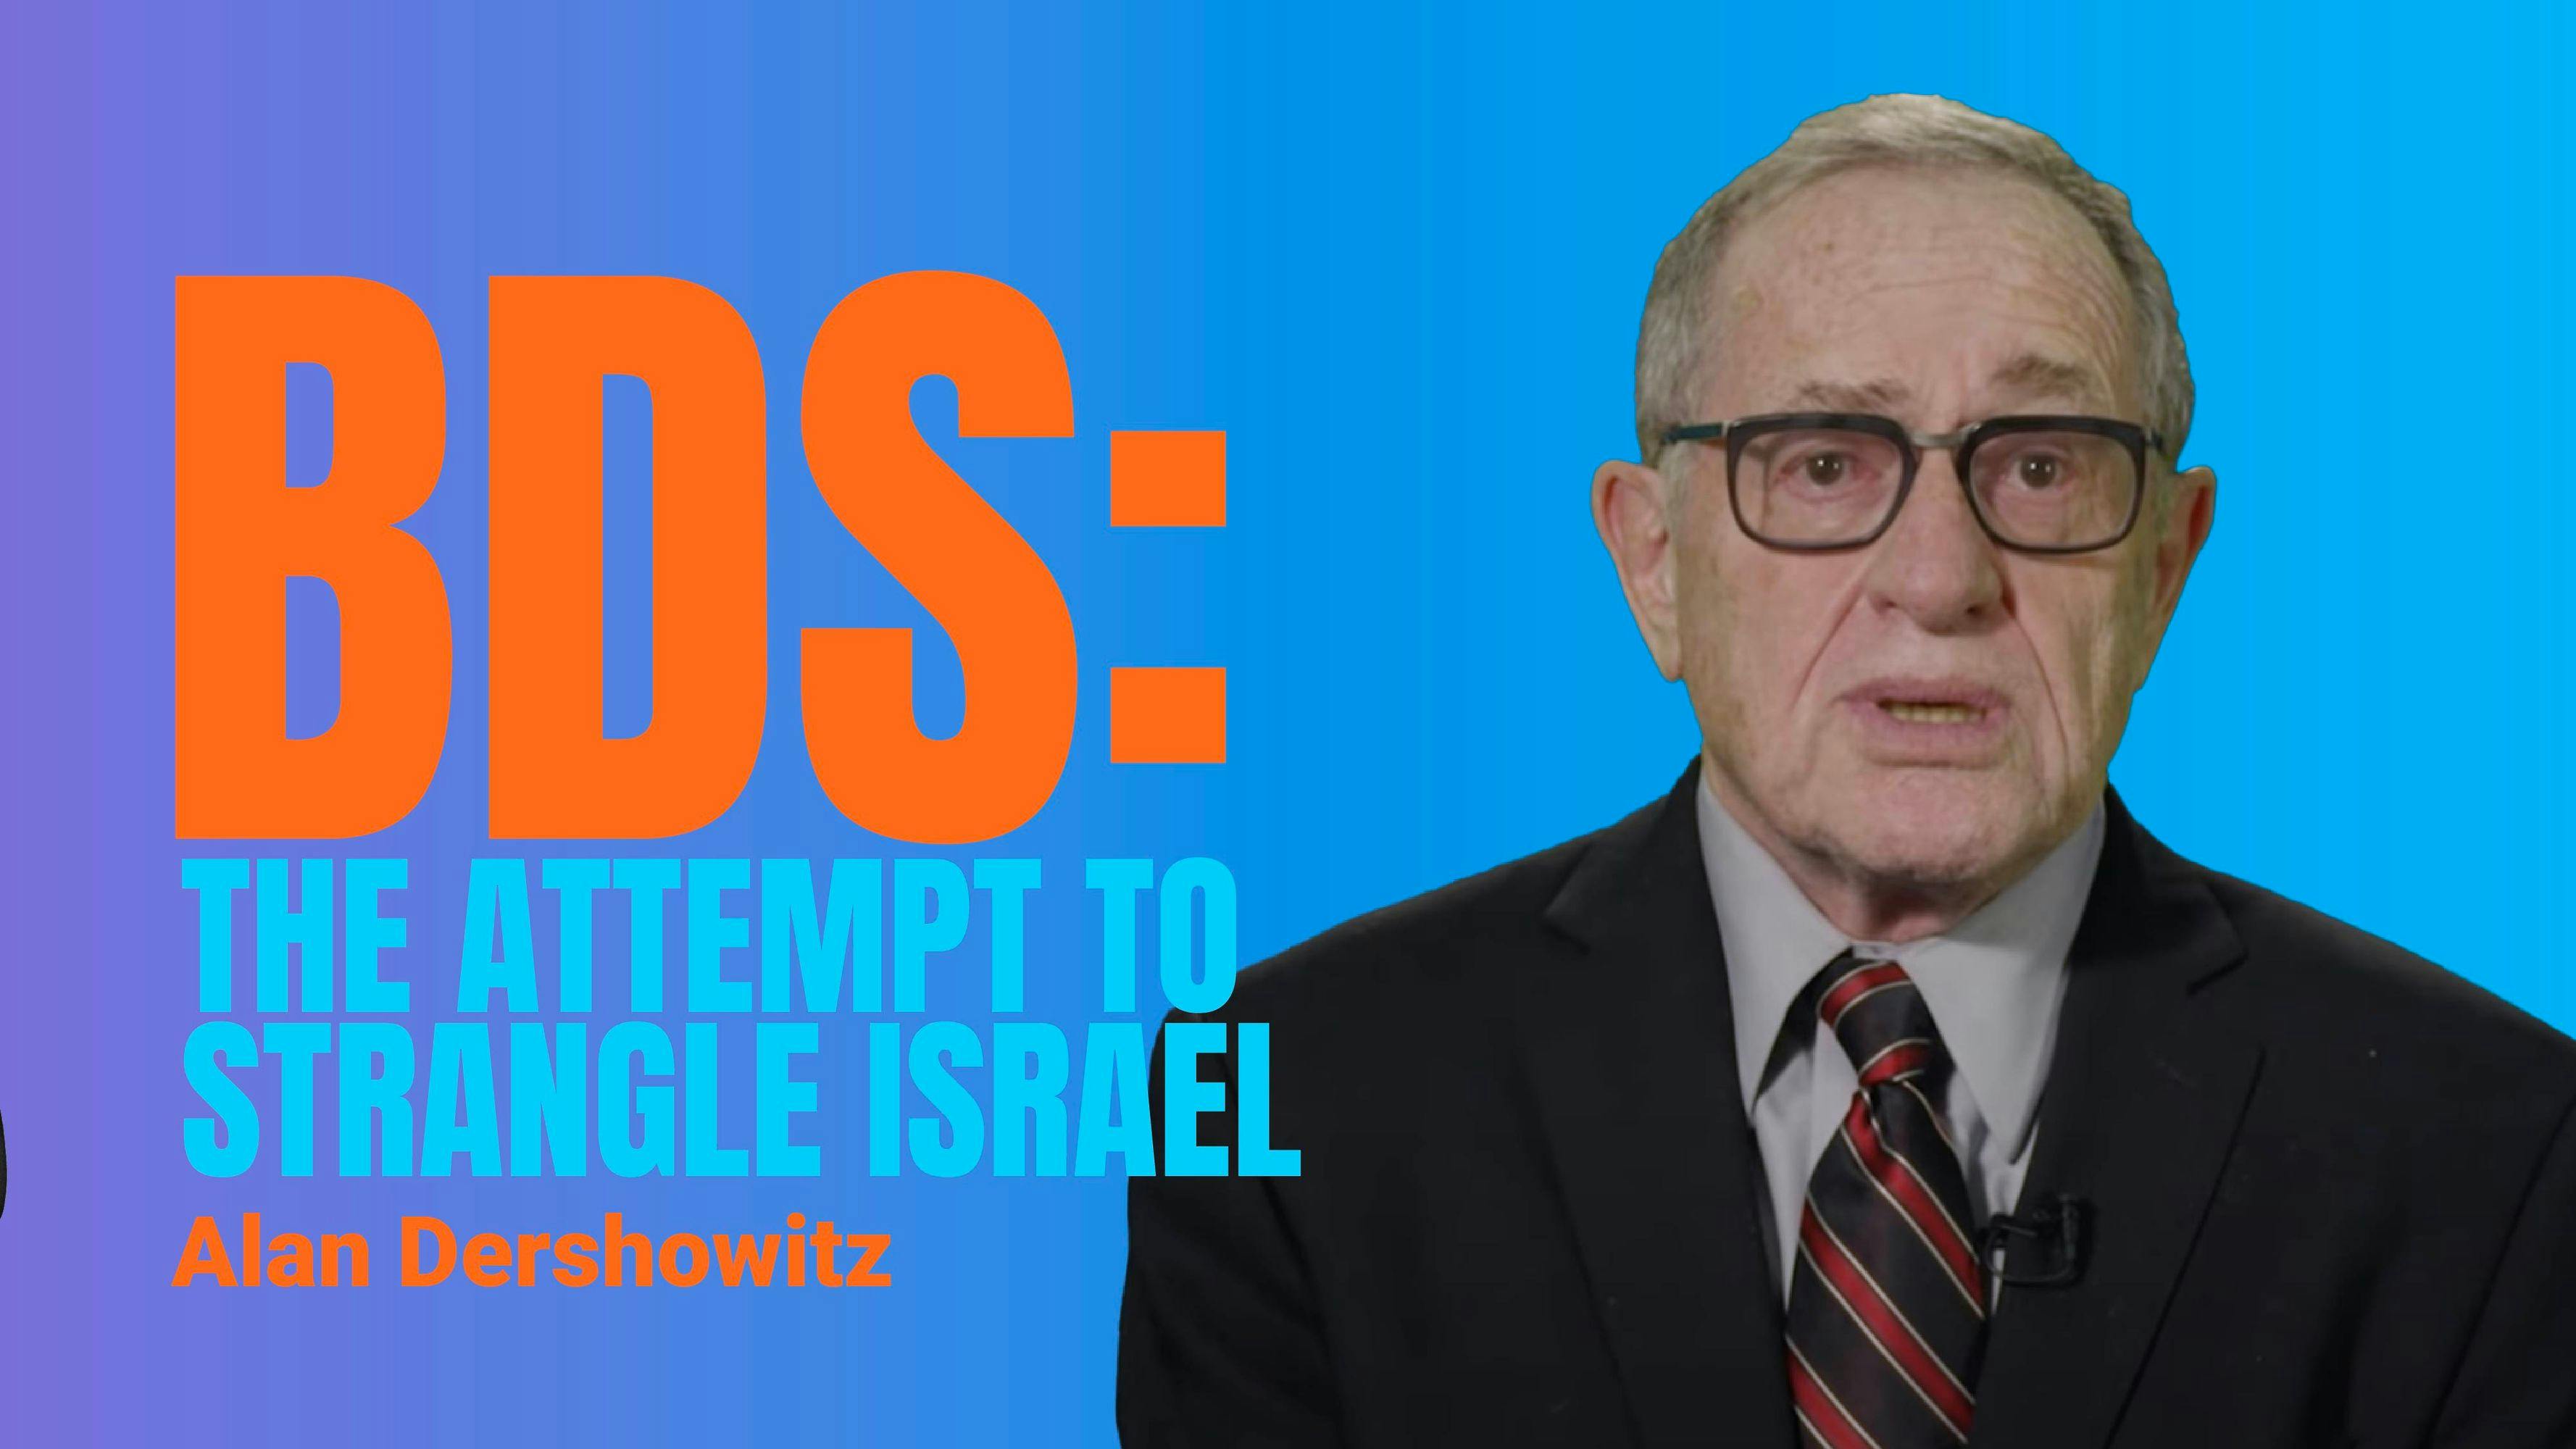 BDS: The Attempt to Strangle Israel